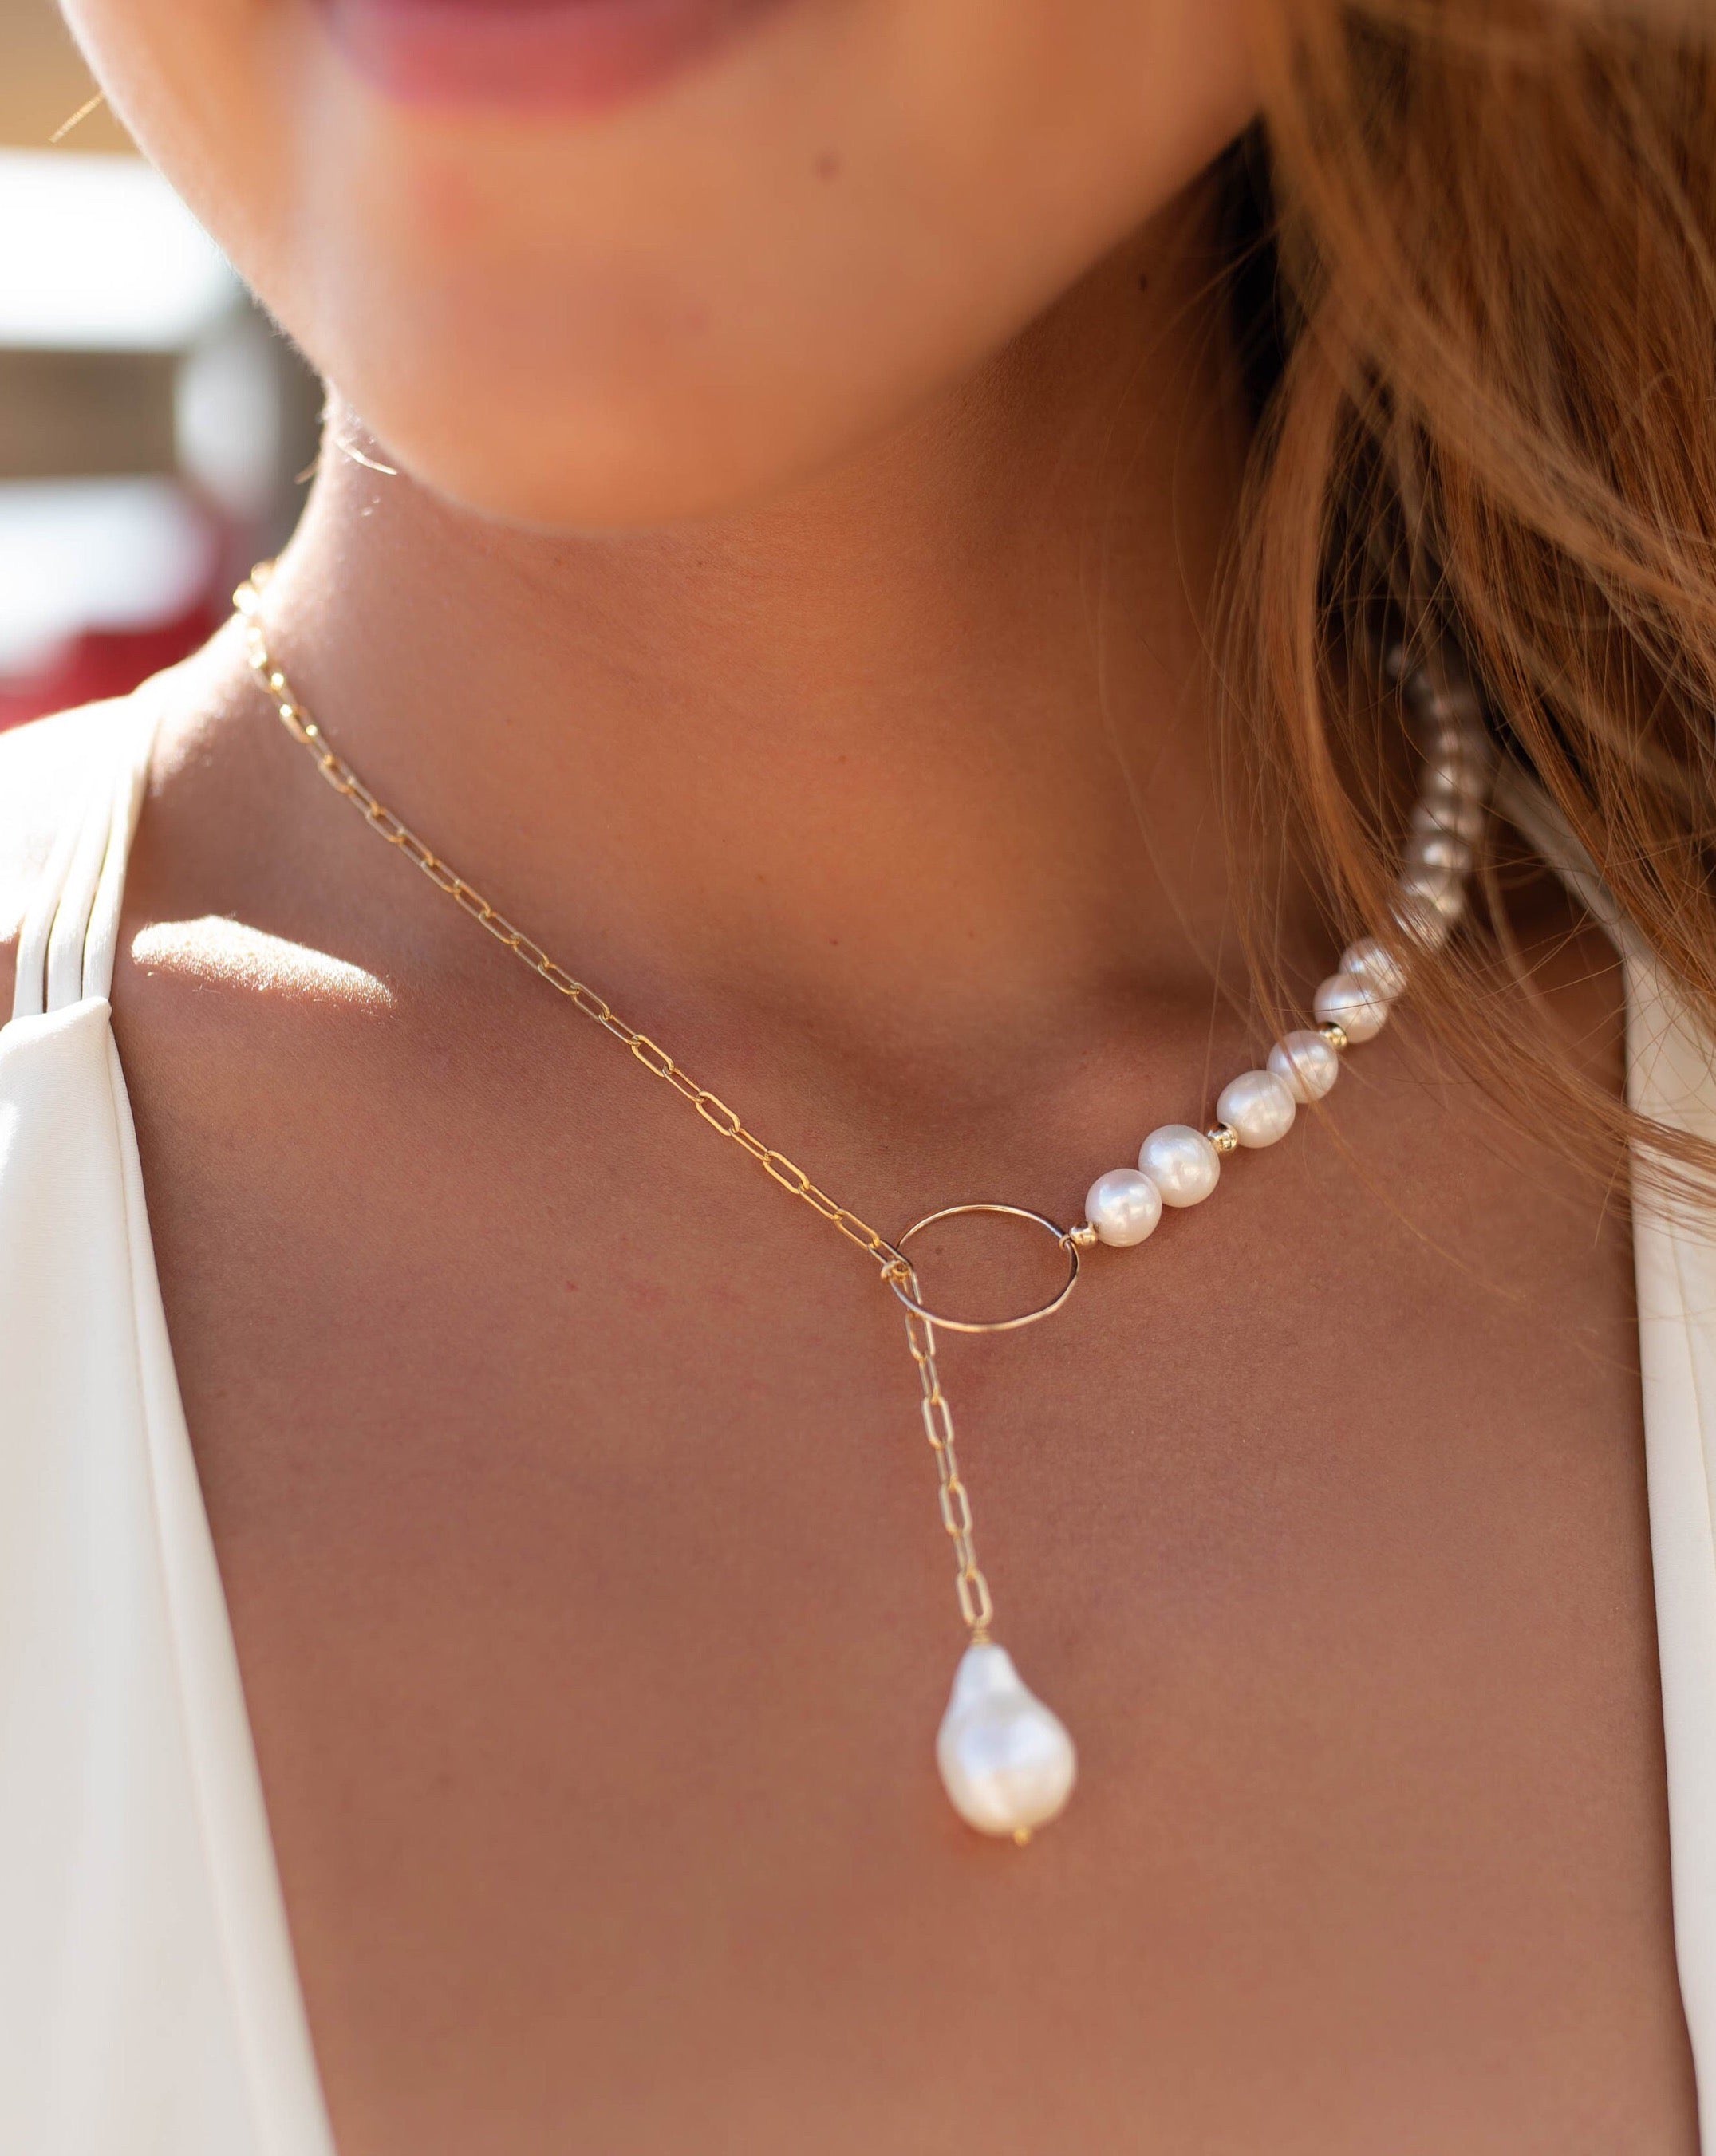 Chunky Knotted Gemstone Diamond Charm Necklace: Pearl – Elliot Young